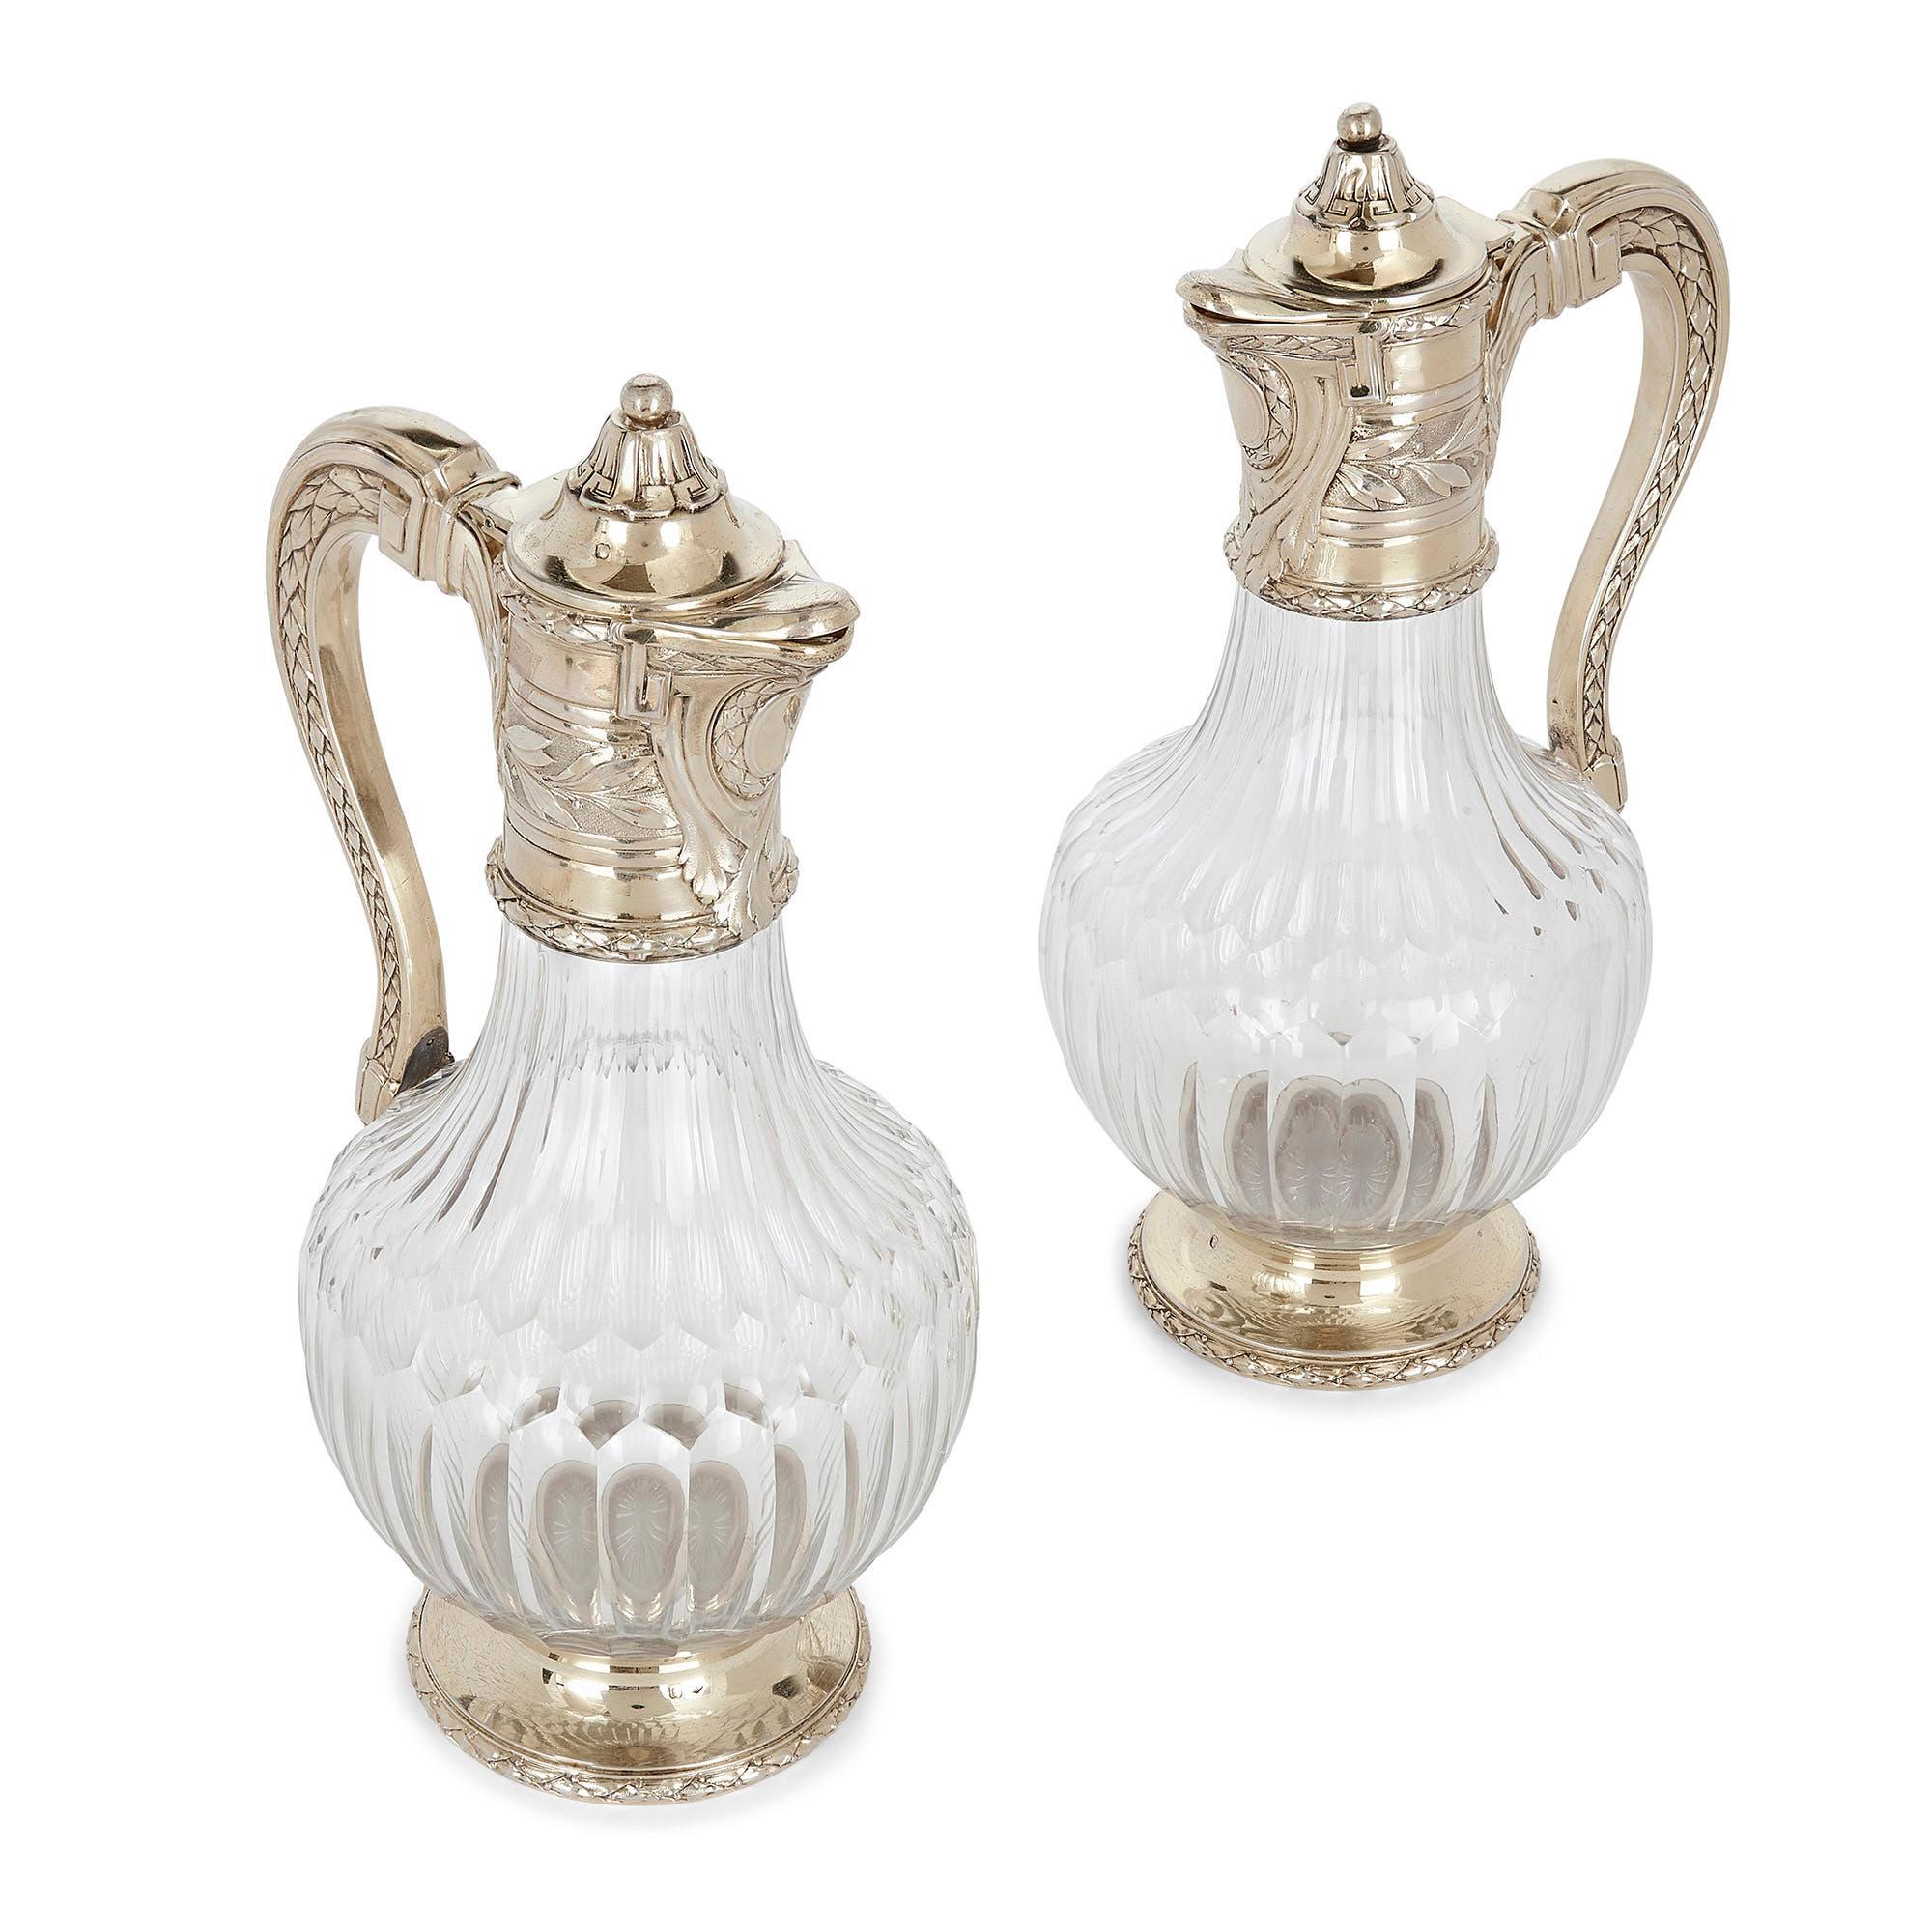 Pair of vermeil and cut glass claret jugs by Tétard
French, early 20th century
Measures: Height 27cm, width 14cm, depth 12cm

This superb pair of claret jugs is by the French firm Tétard Frères, a leading producer of luxury silverware. Each jug